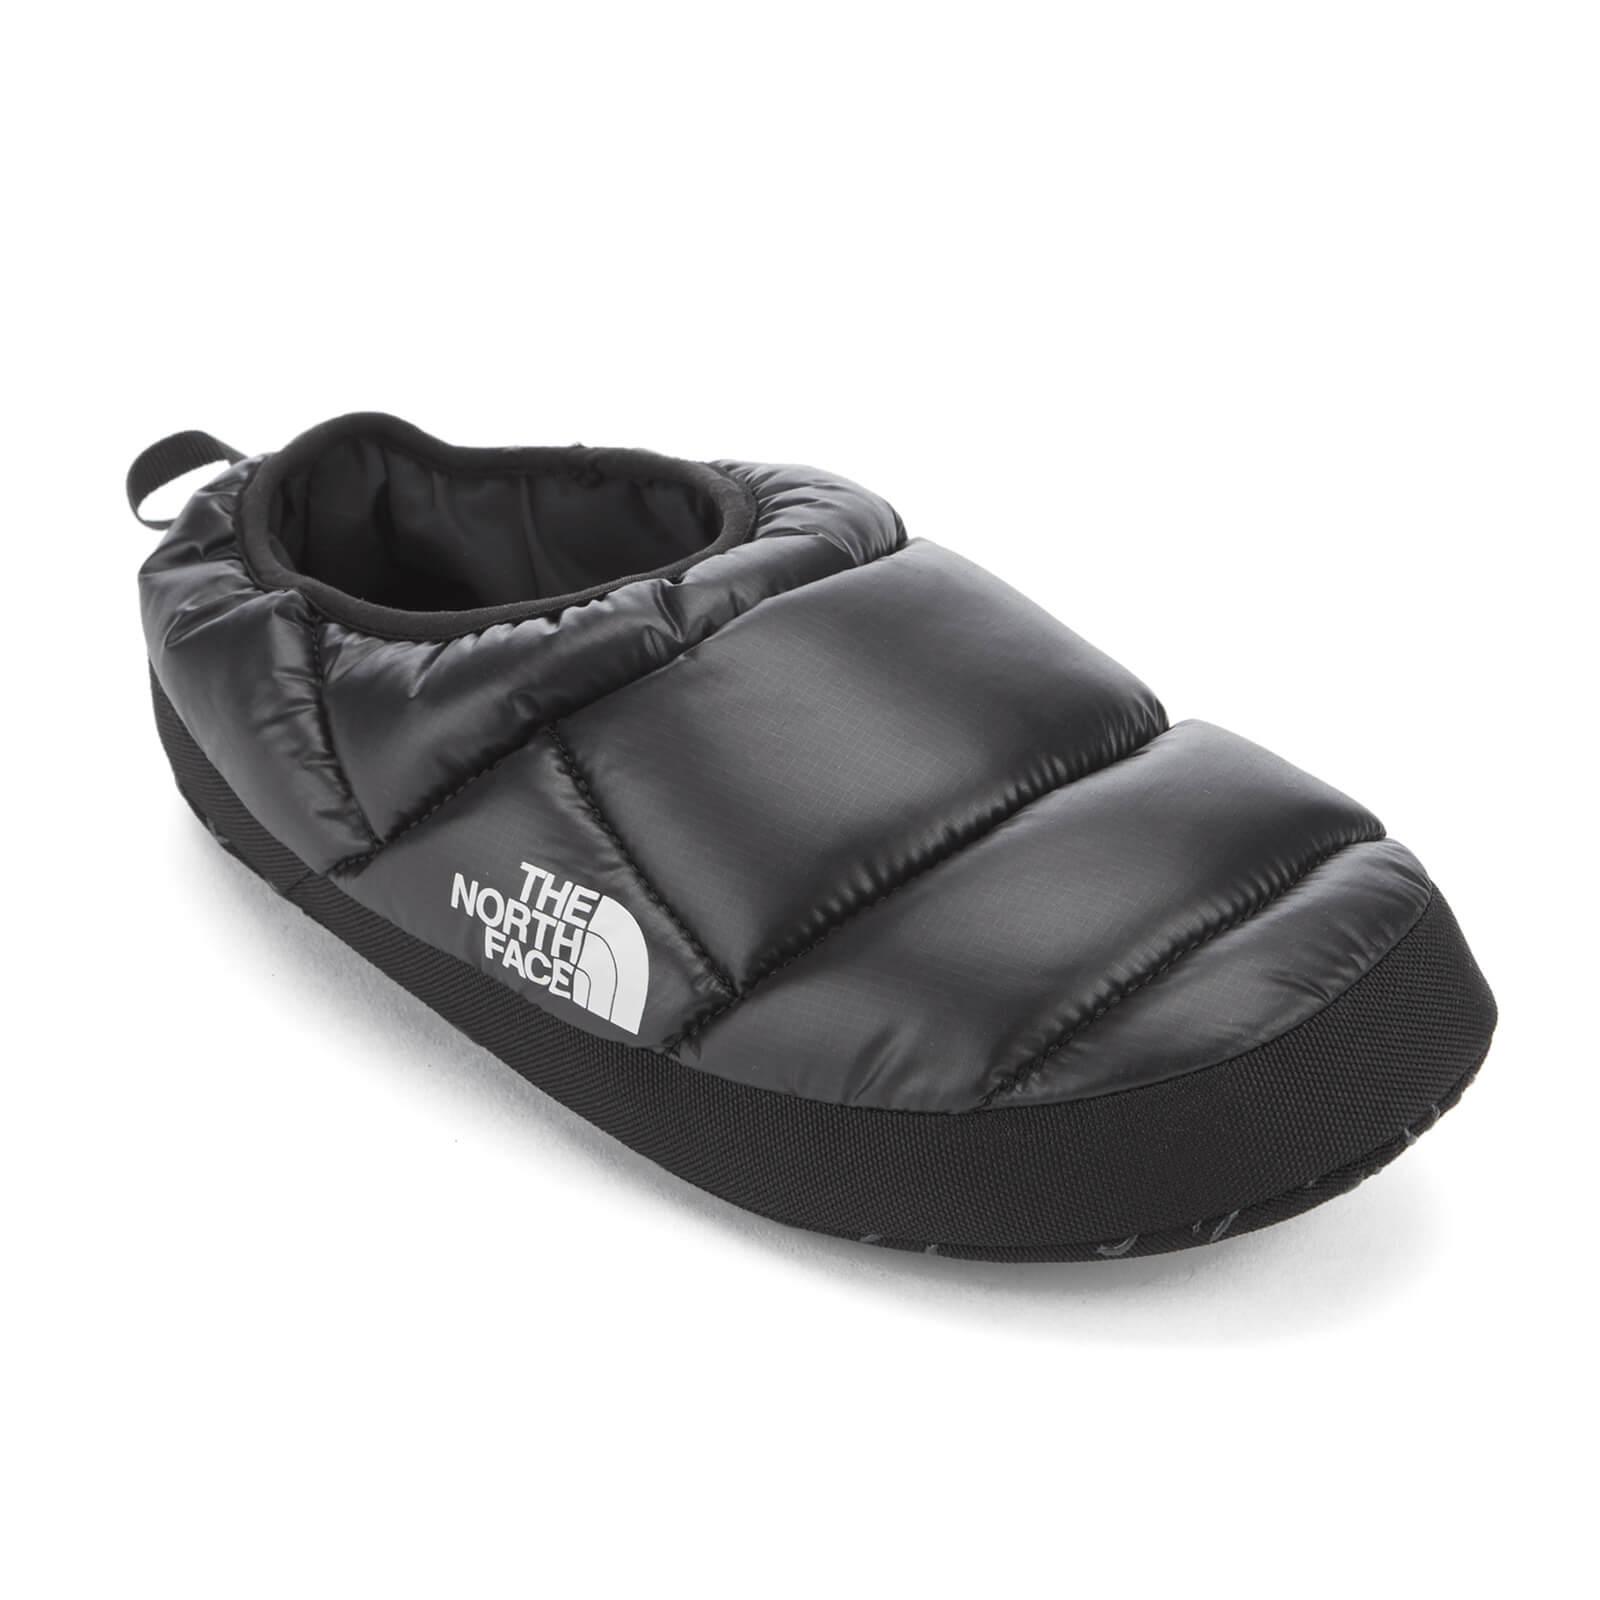 The North Face Nse Tent Mule Iii Slippers in Black for Men - Lyst